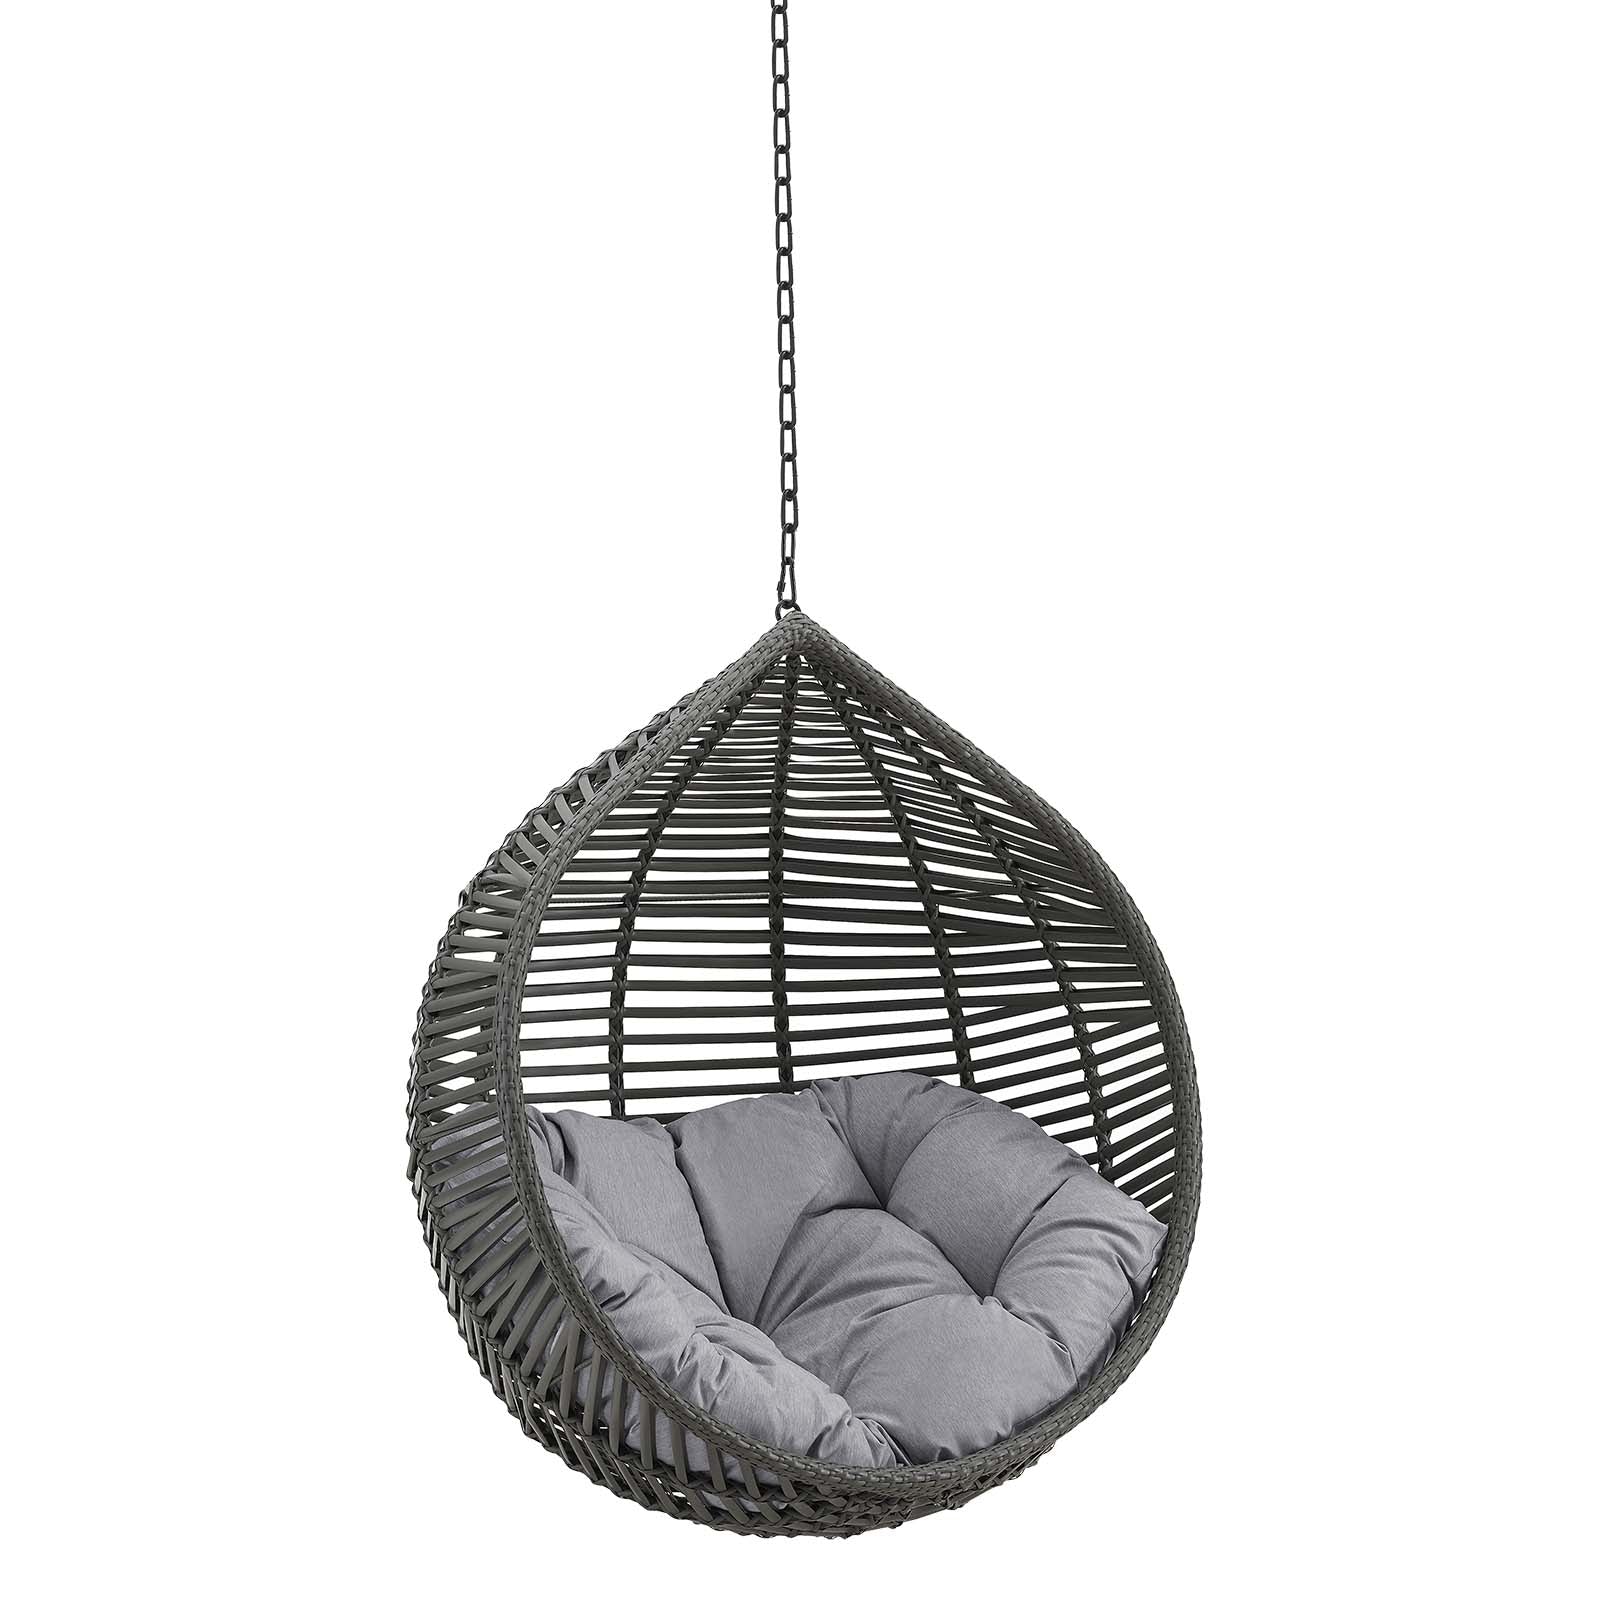 Garner Teardrop Patio Swing Chair Without Stand